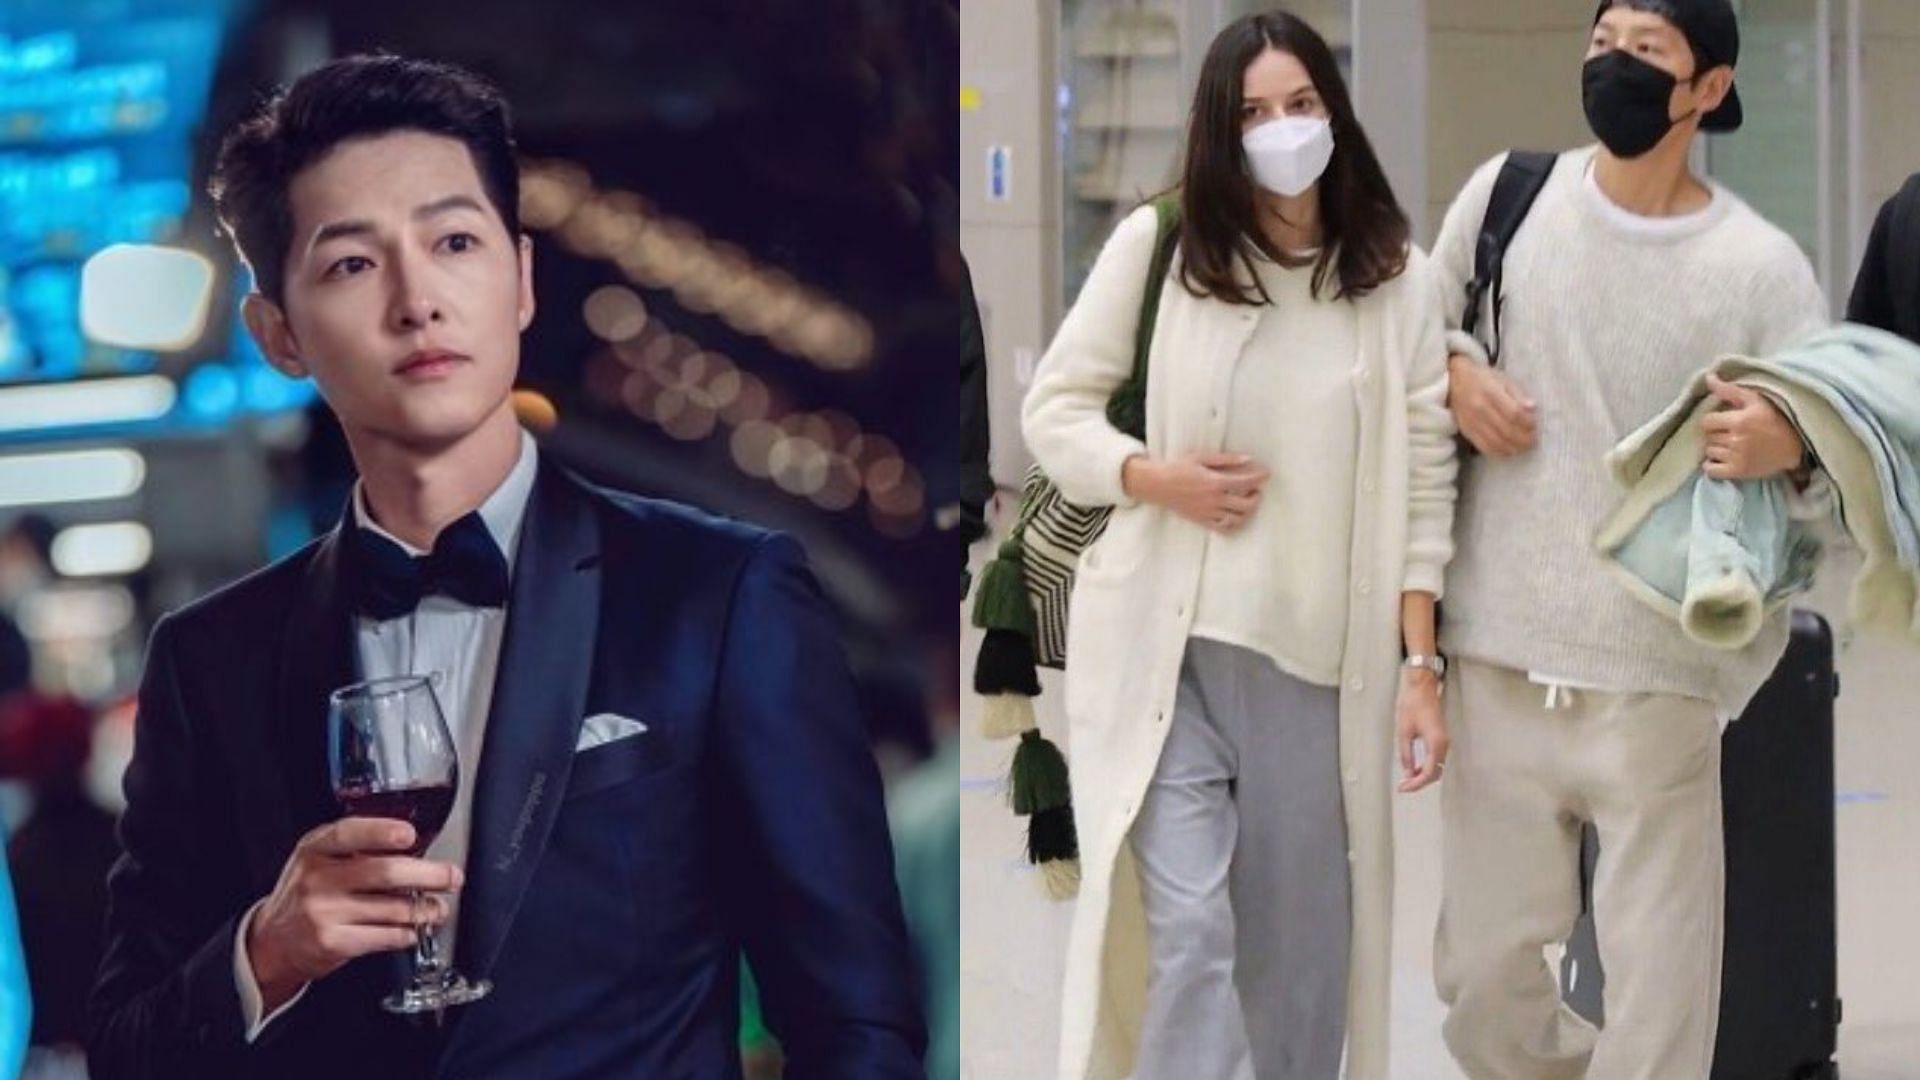 I'm so happy”: Song Joong-ki's fans react to news about him going public with non-celebrity girlfriend